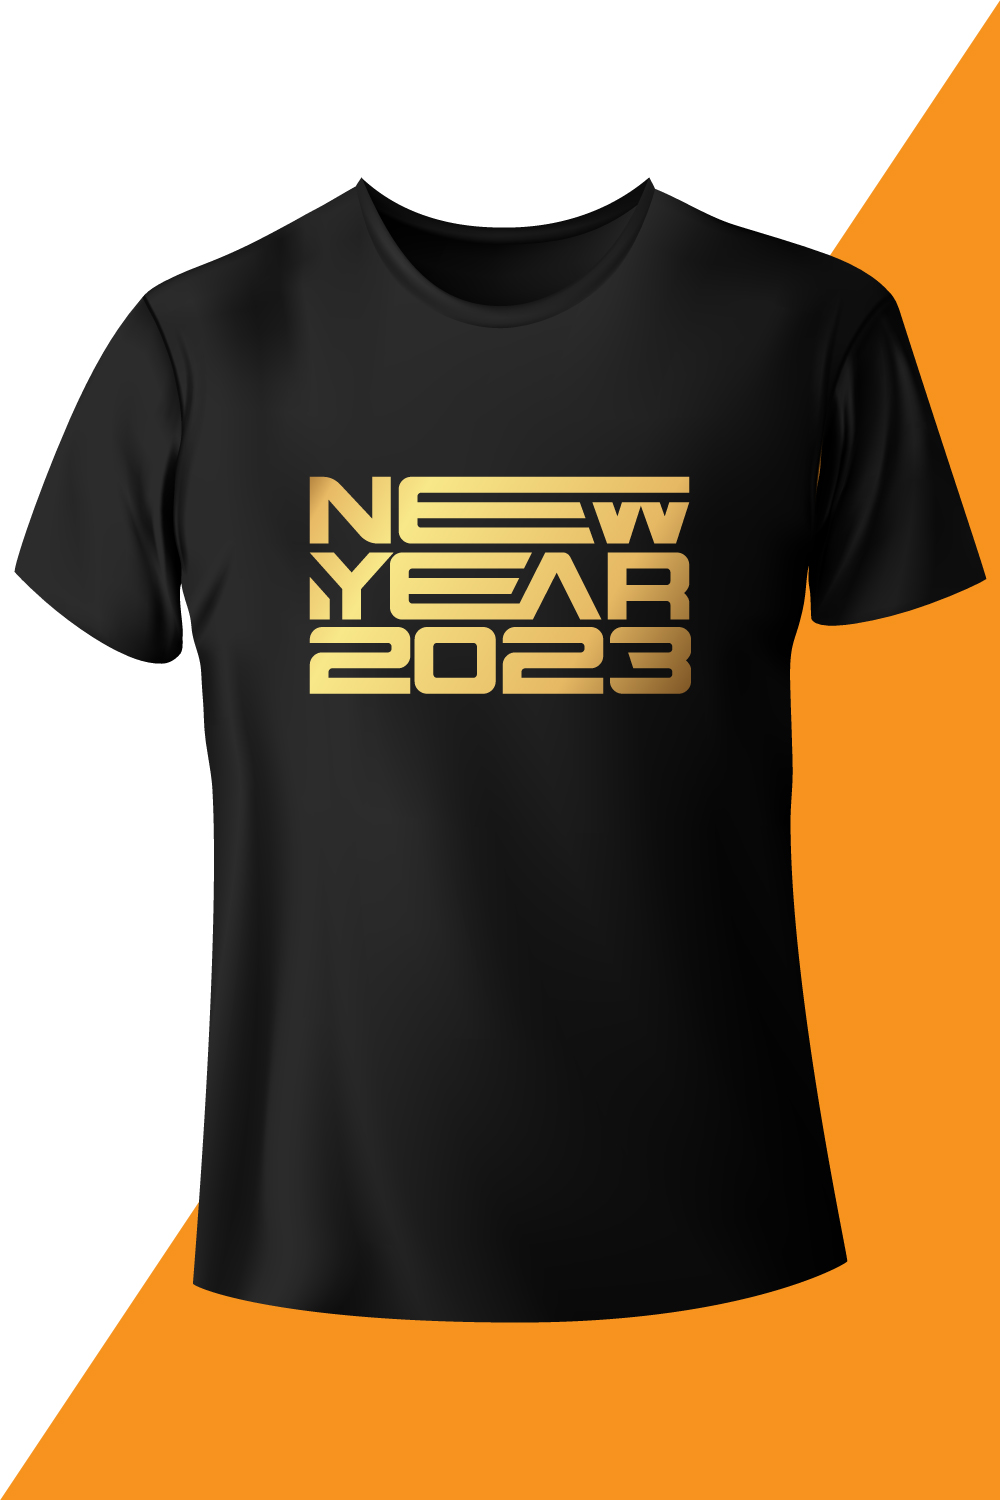 Image of a black T-shirt with an irresistible New Year 2023 print.